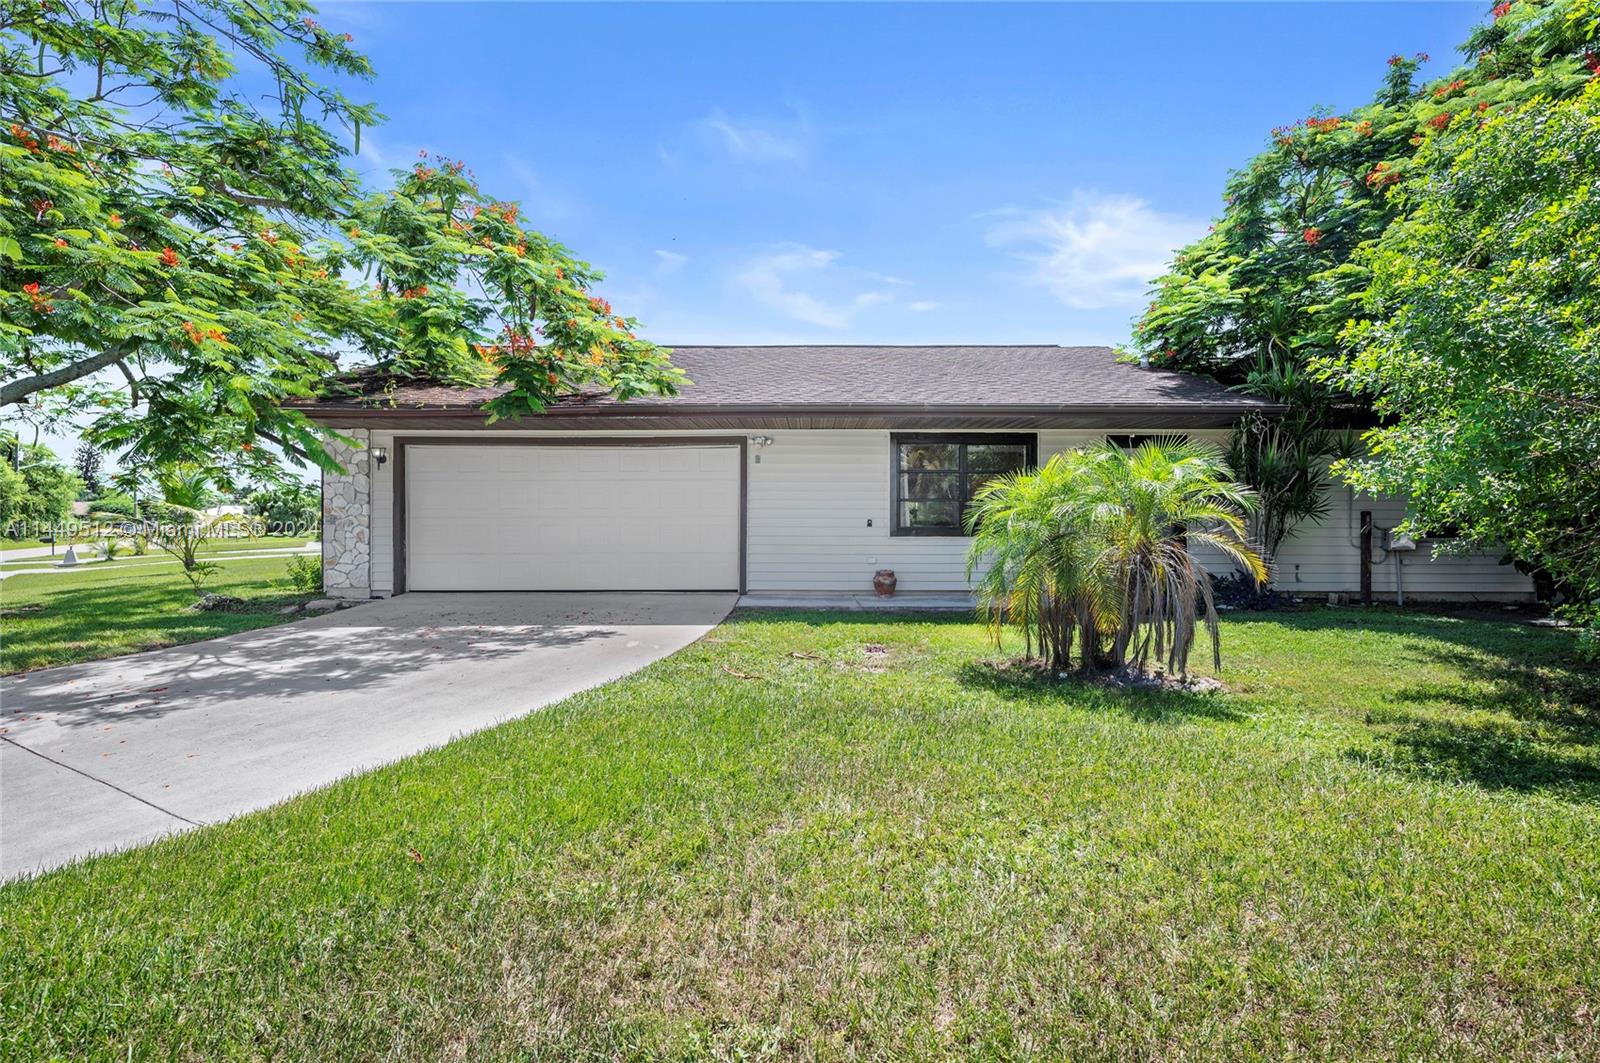 102 SE Whitmore Dr, Port St. Lucie, FL 34984, 3 Bedrooms Bedrooms, ,3 BathroomsBathrooms,Residential,For Sale,Whitmore Dr,A11449512